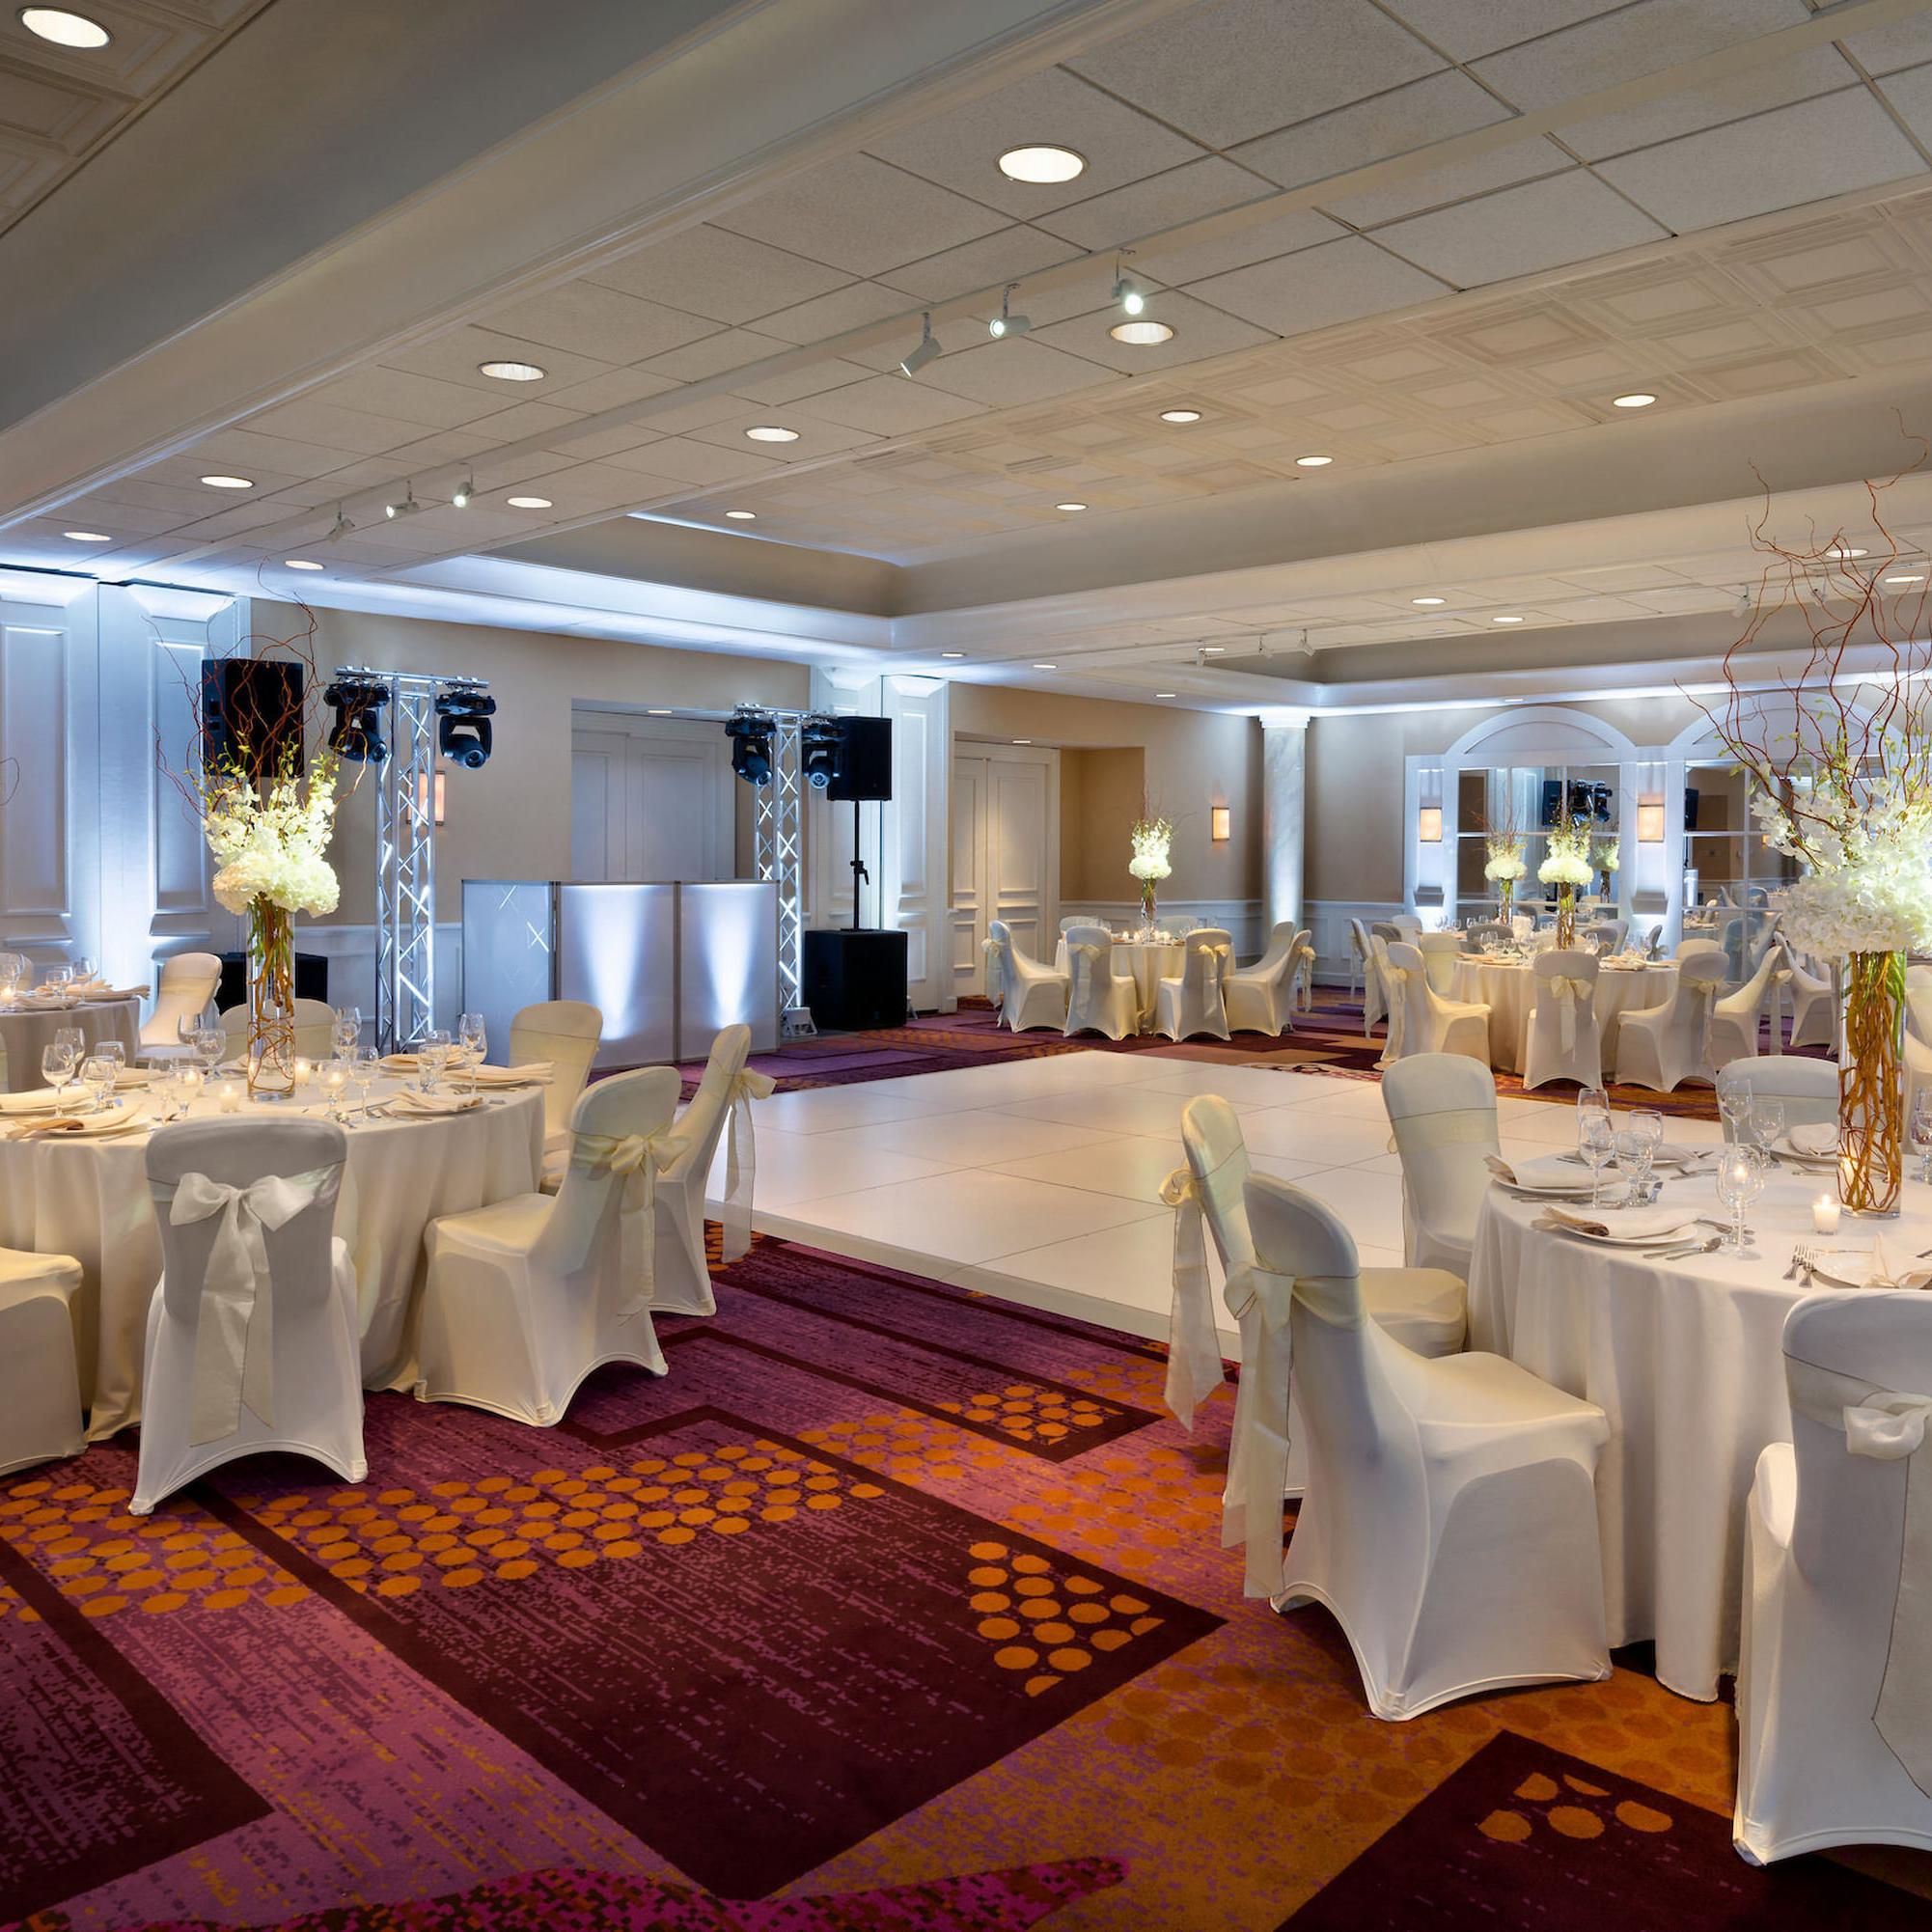 Plan your Englewood wedding or social event in our Grand Ballroom